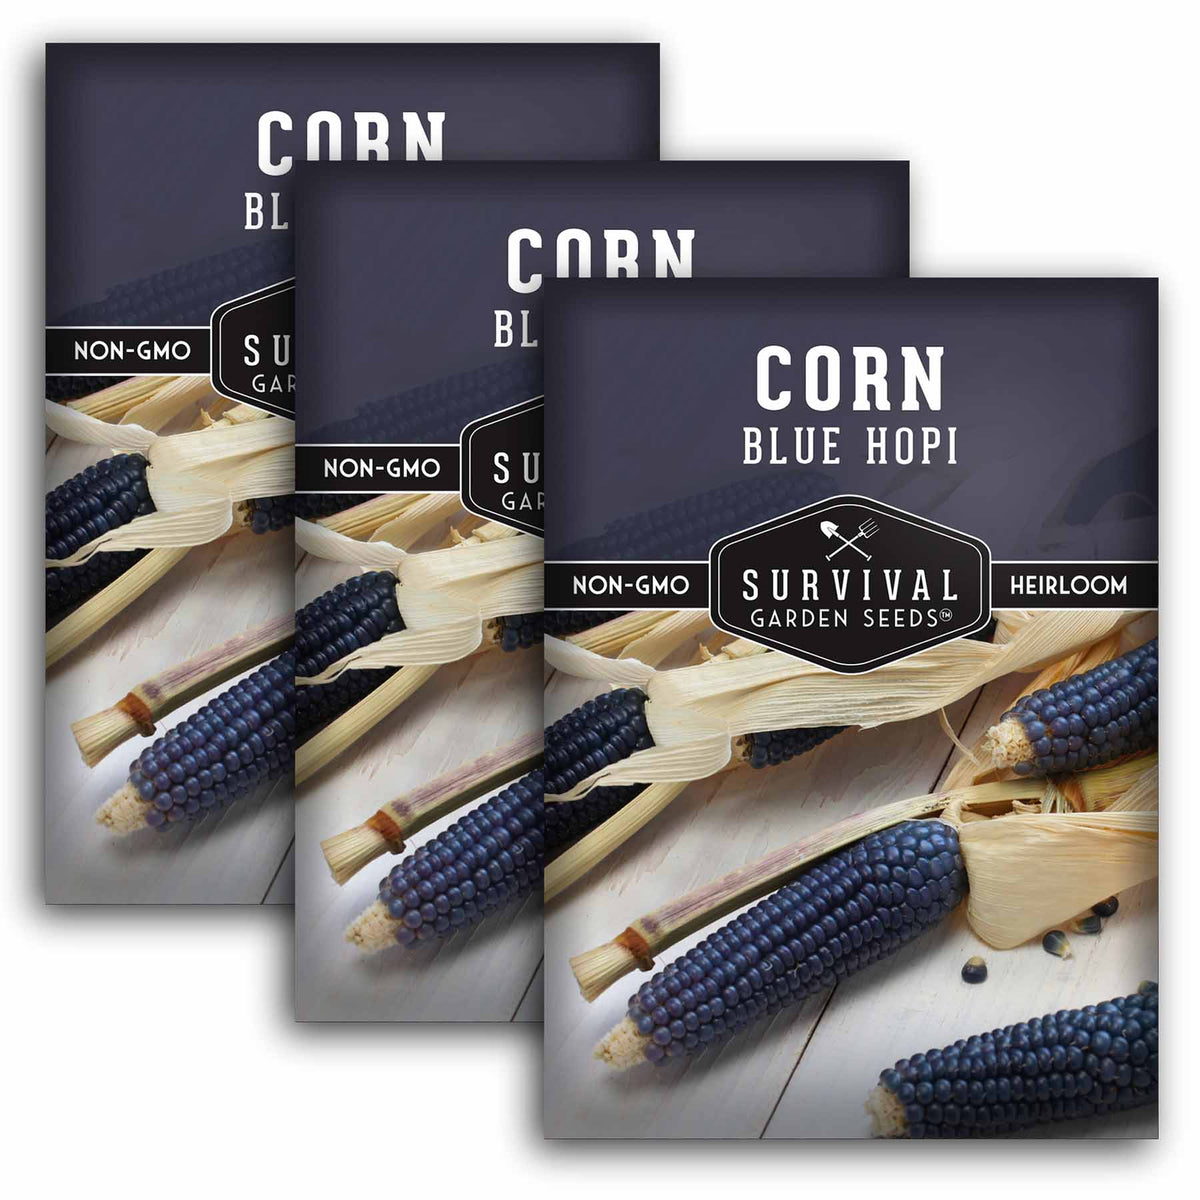 3 packets of Blue Hope Corn seeds